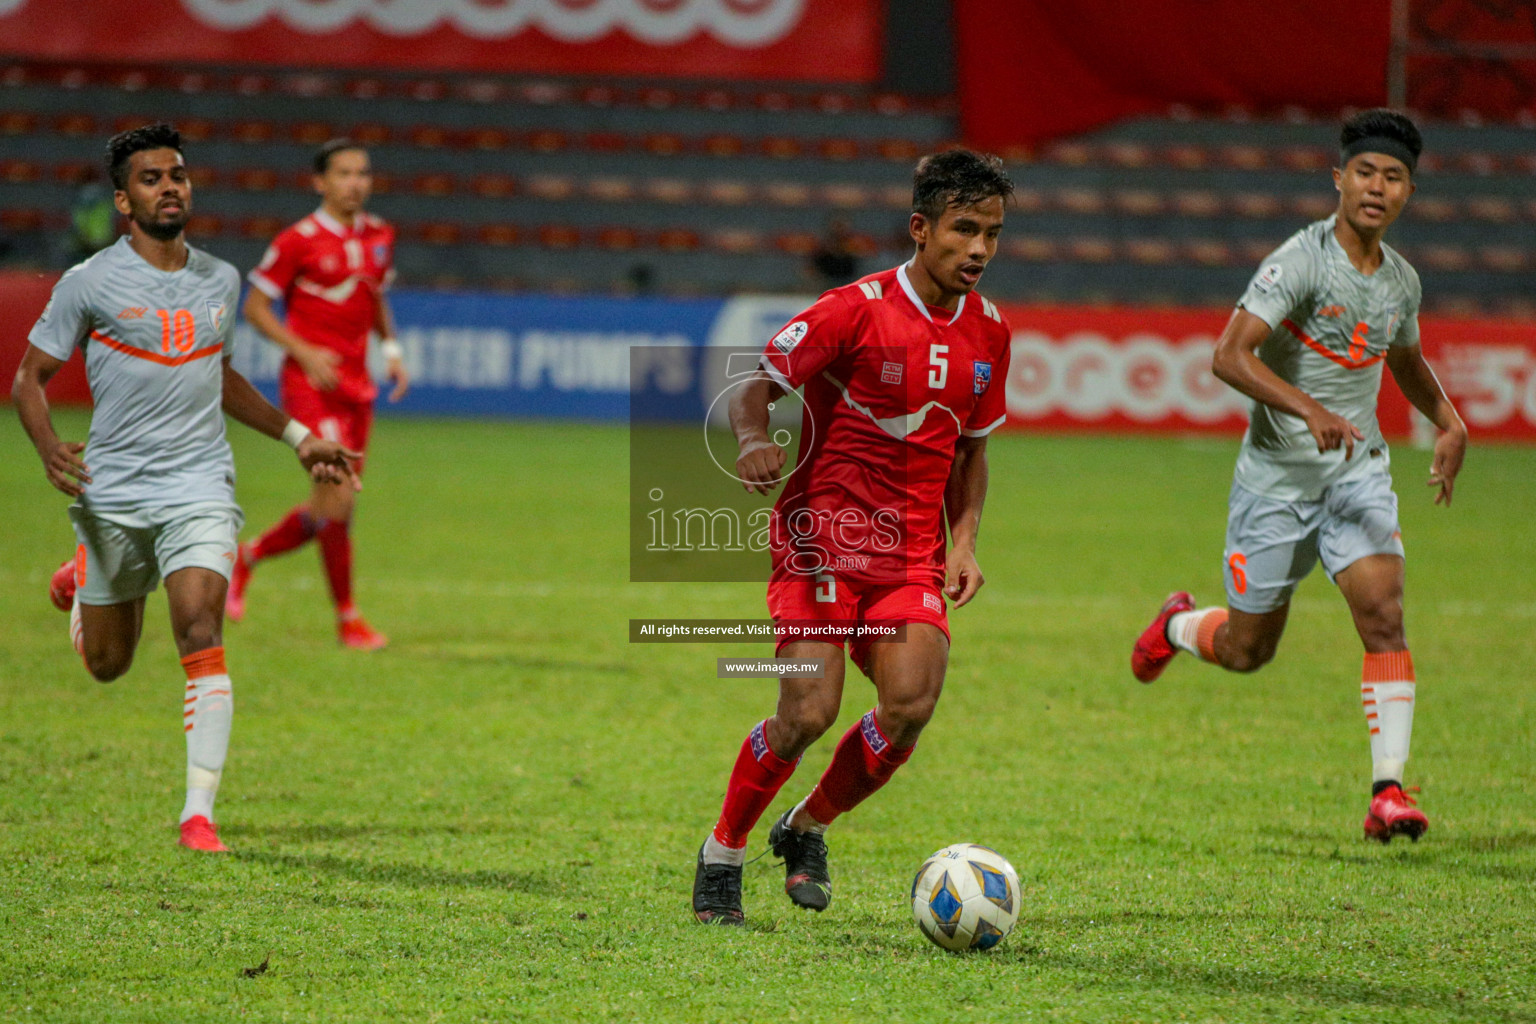 India vs Nepal in SAFF Championship 2021 held on 10th October 2021 in Galolhu National Stadium, Male', Maldives